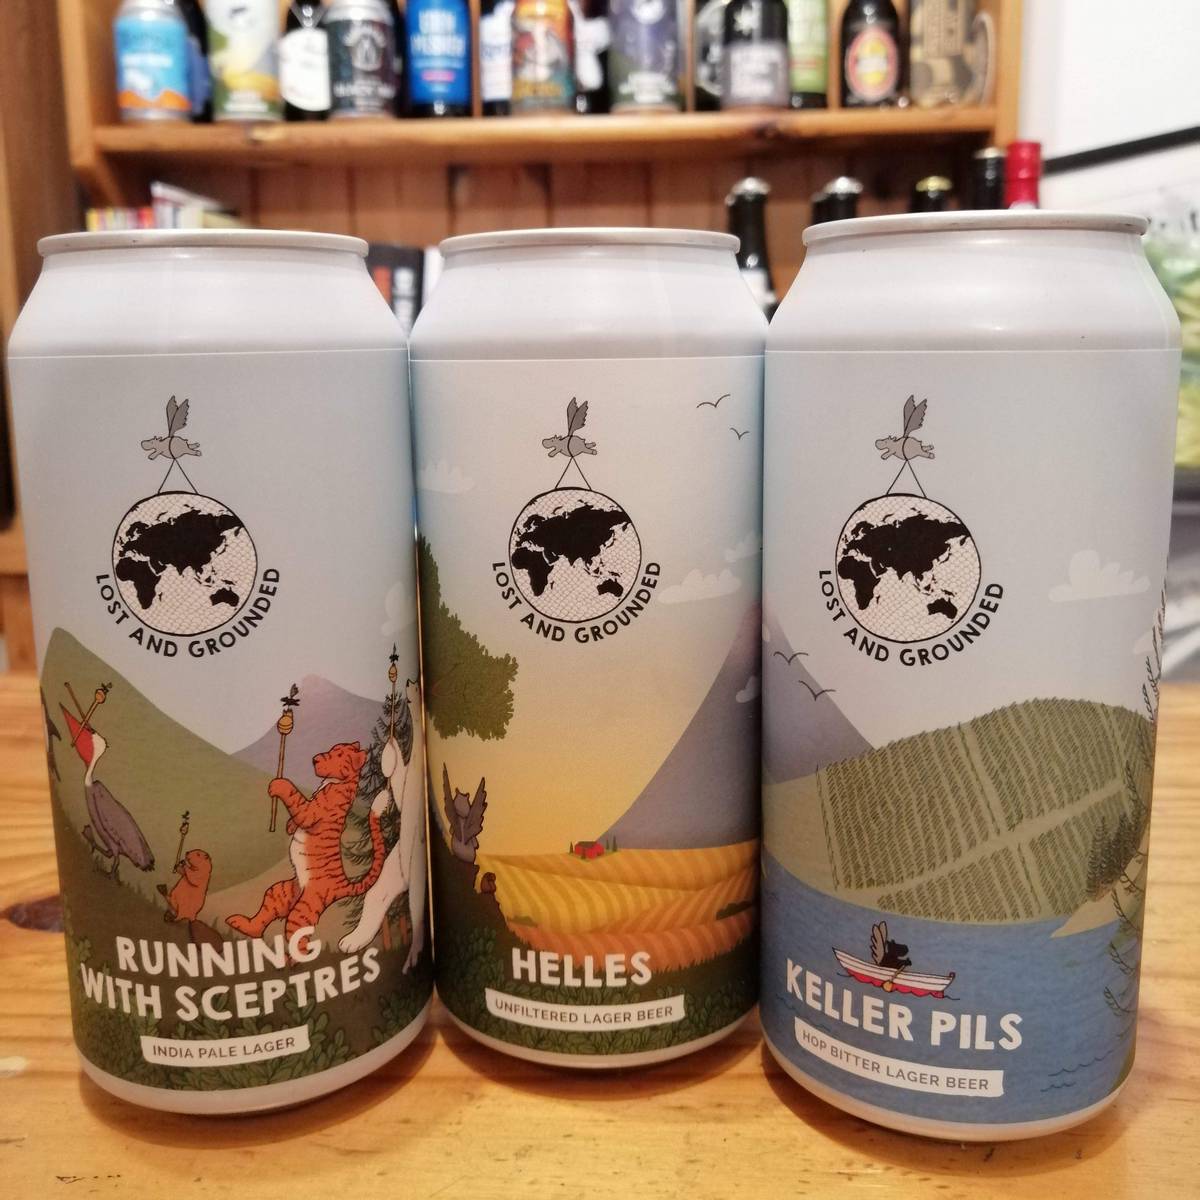 Lost and Grounded lagers